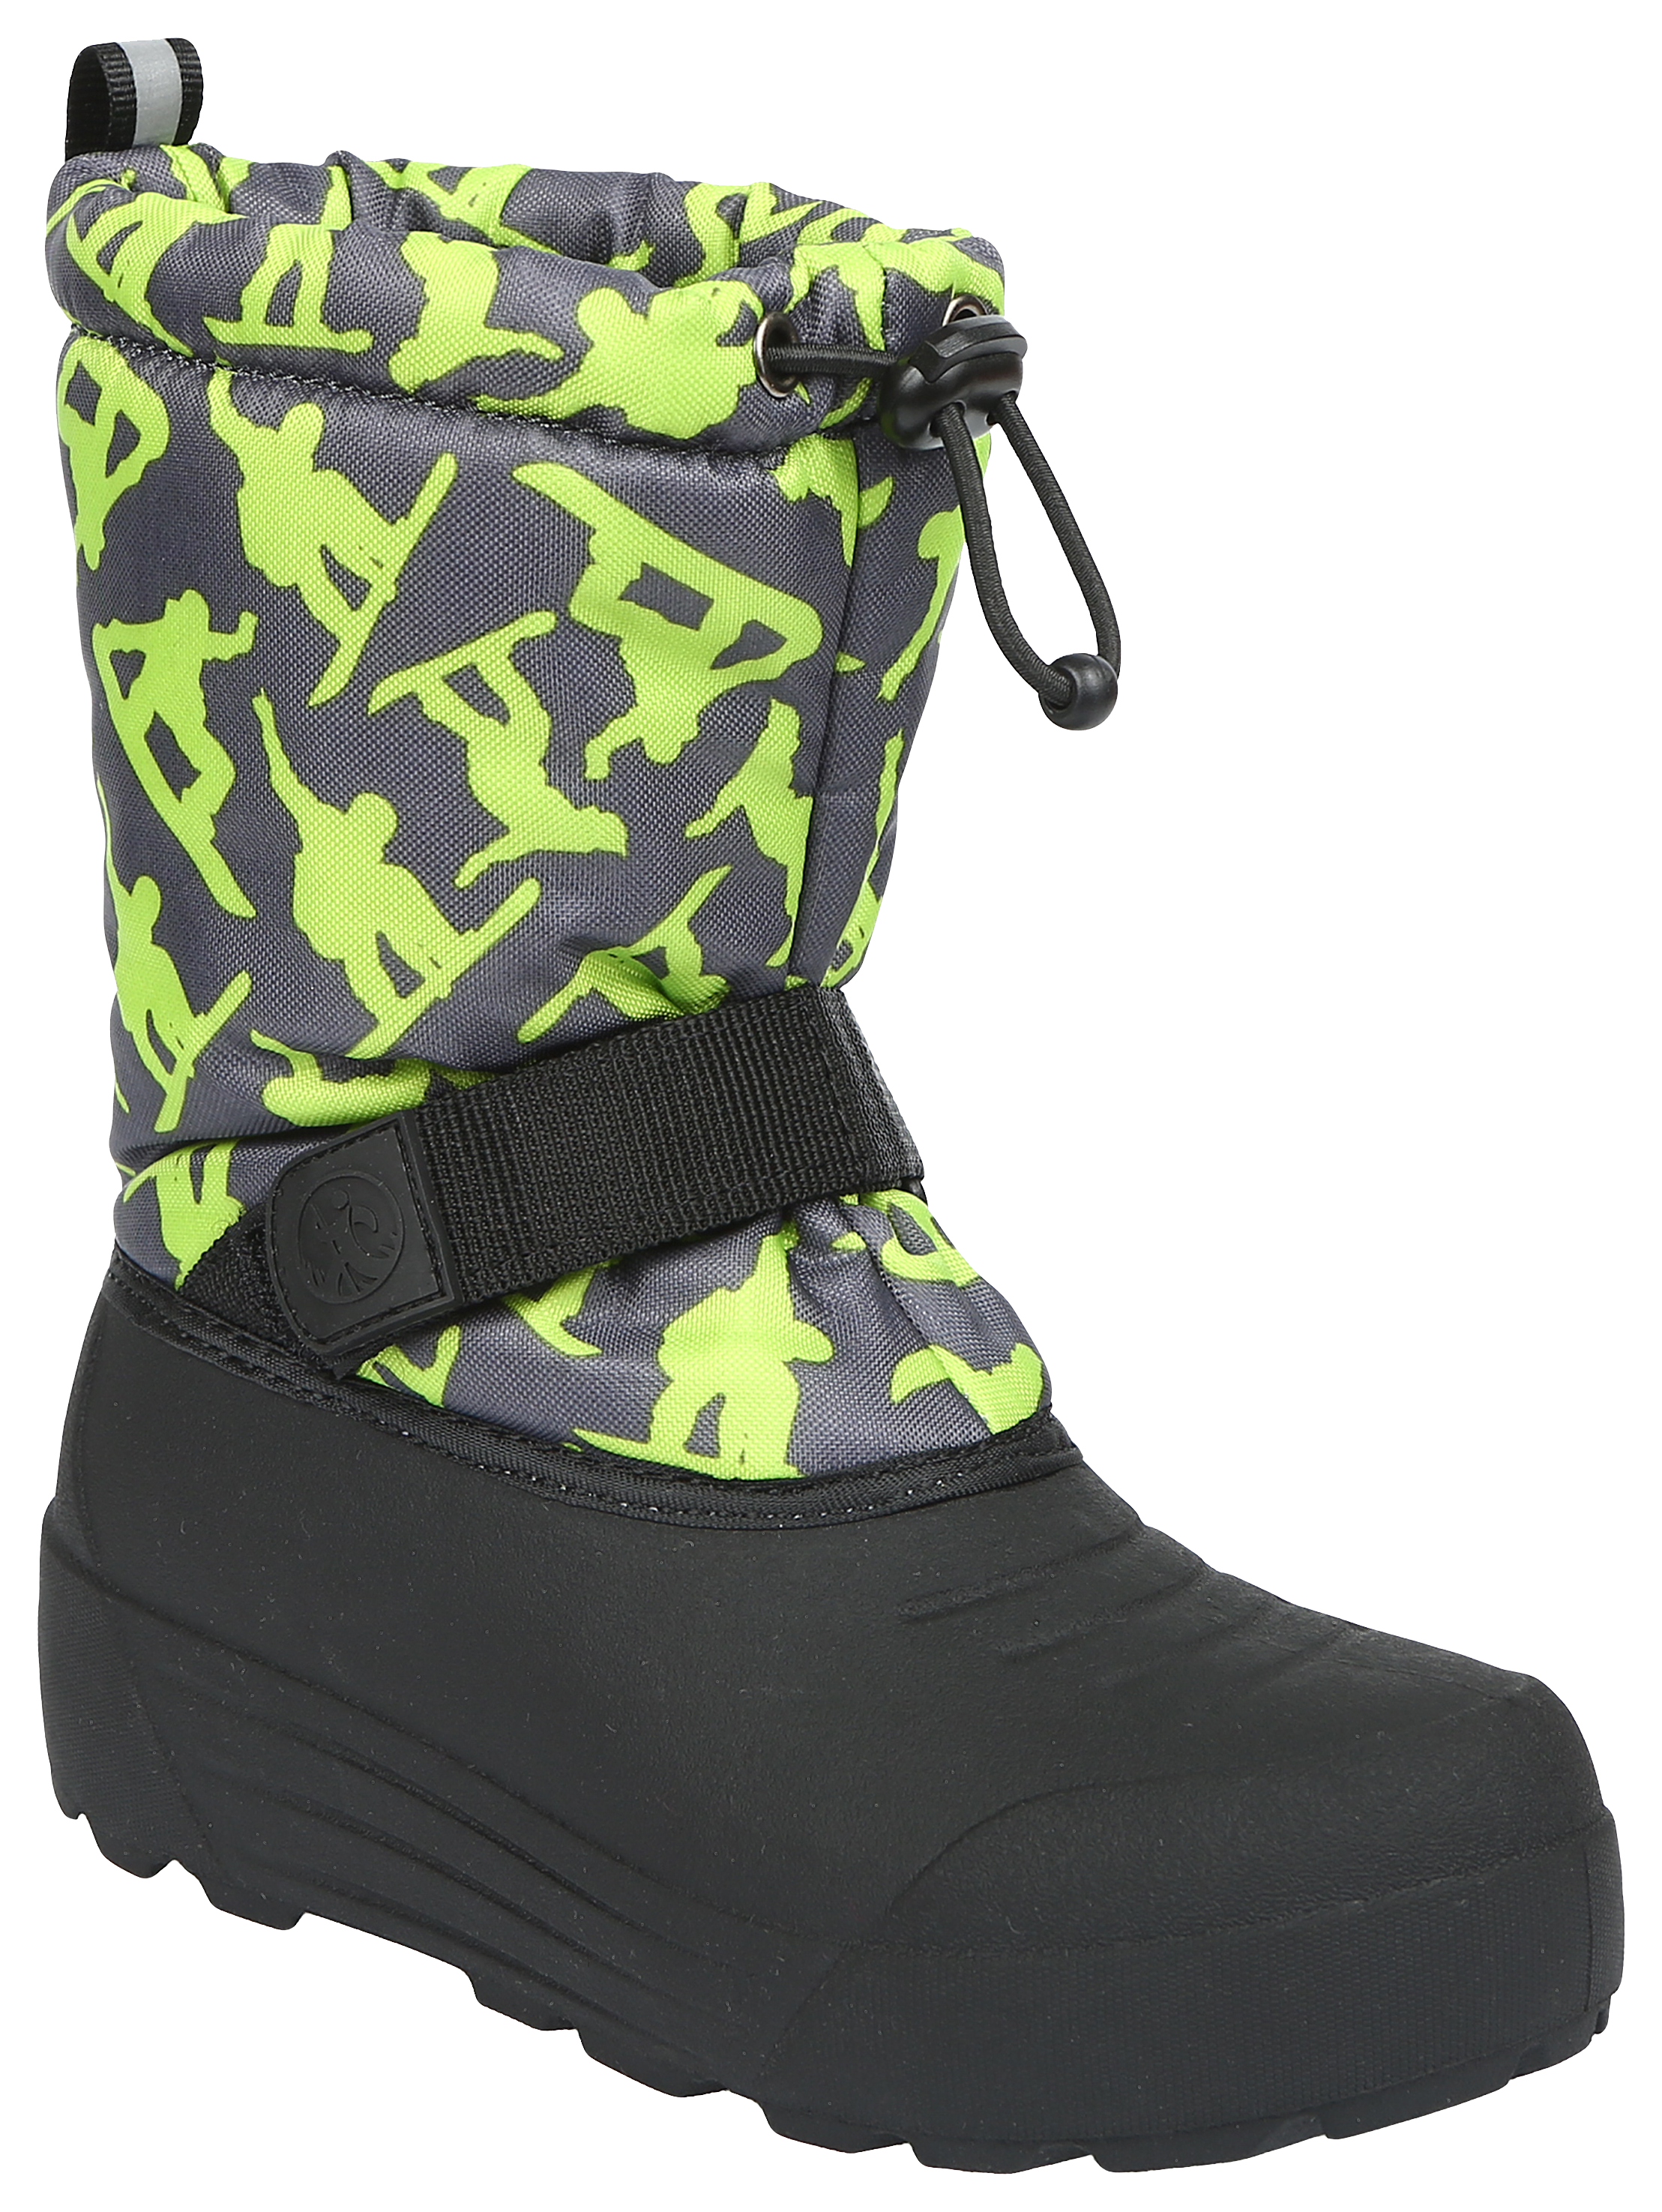 Northside Frosty Insulated Pac Boots for Kids - Dark Gray/Green - 5 Kids